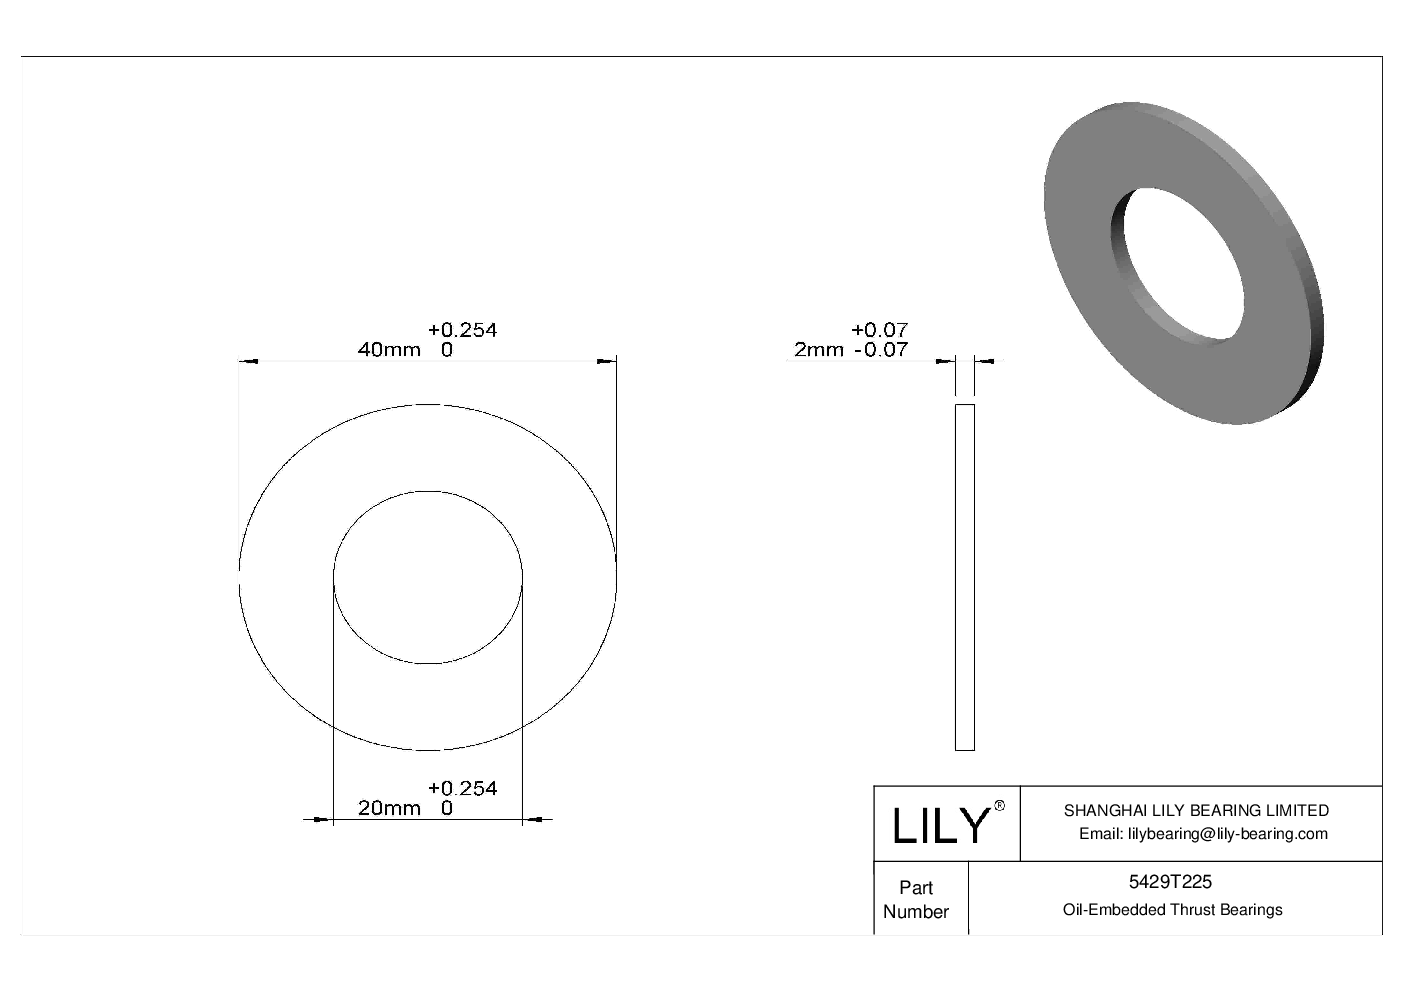 FECJTCCF Food Industry Oil-Embedded Thrust Bearings cad drawing